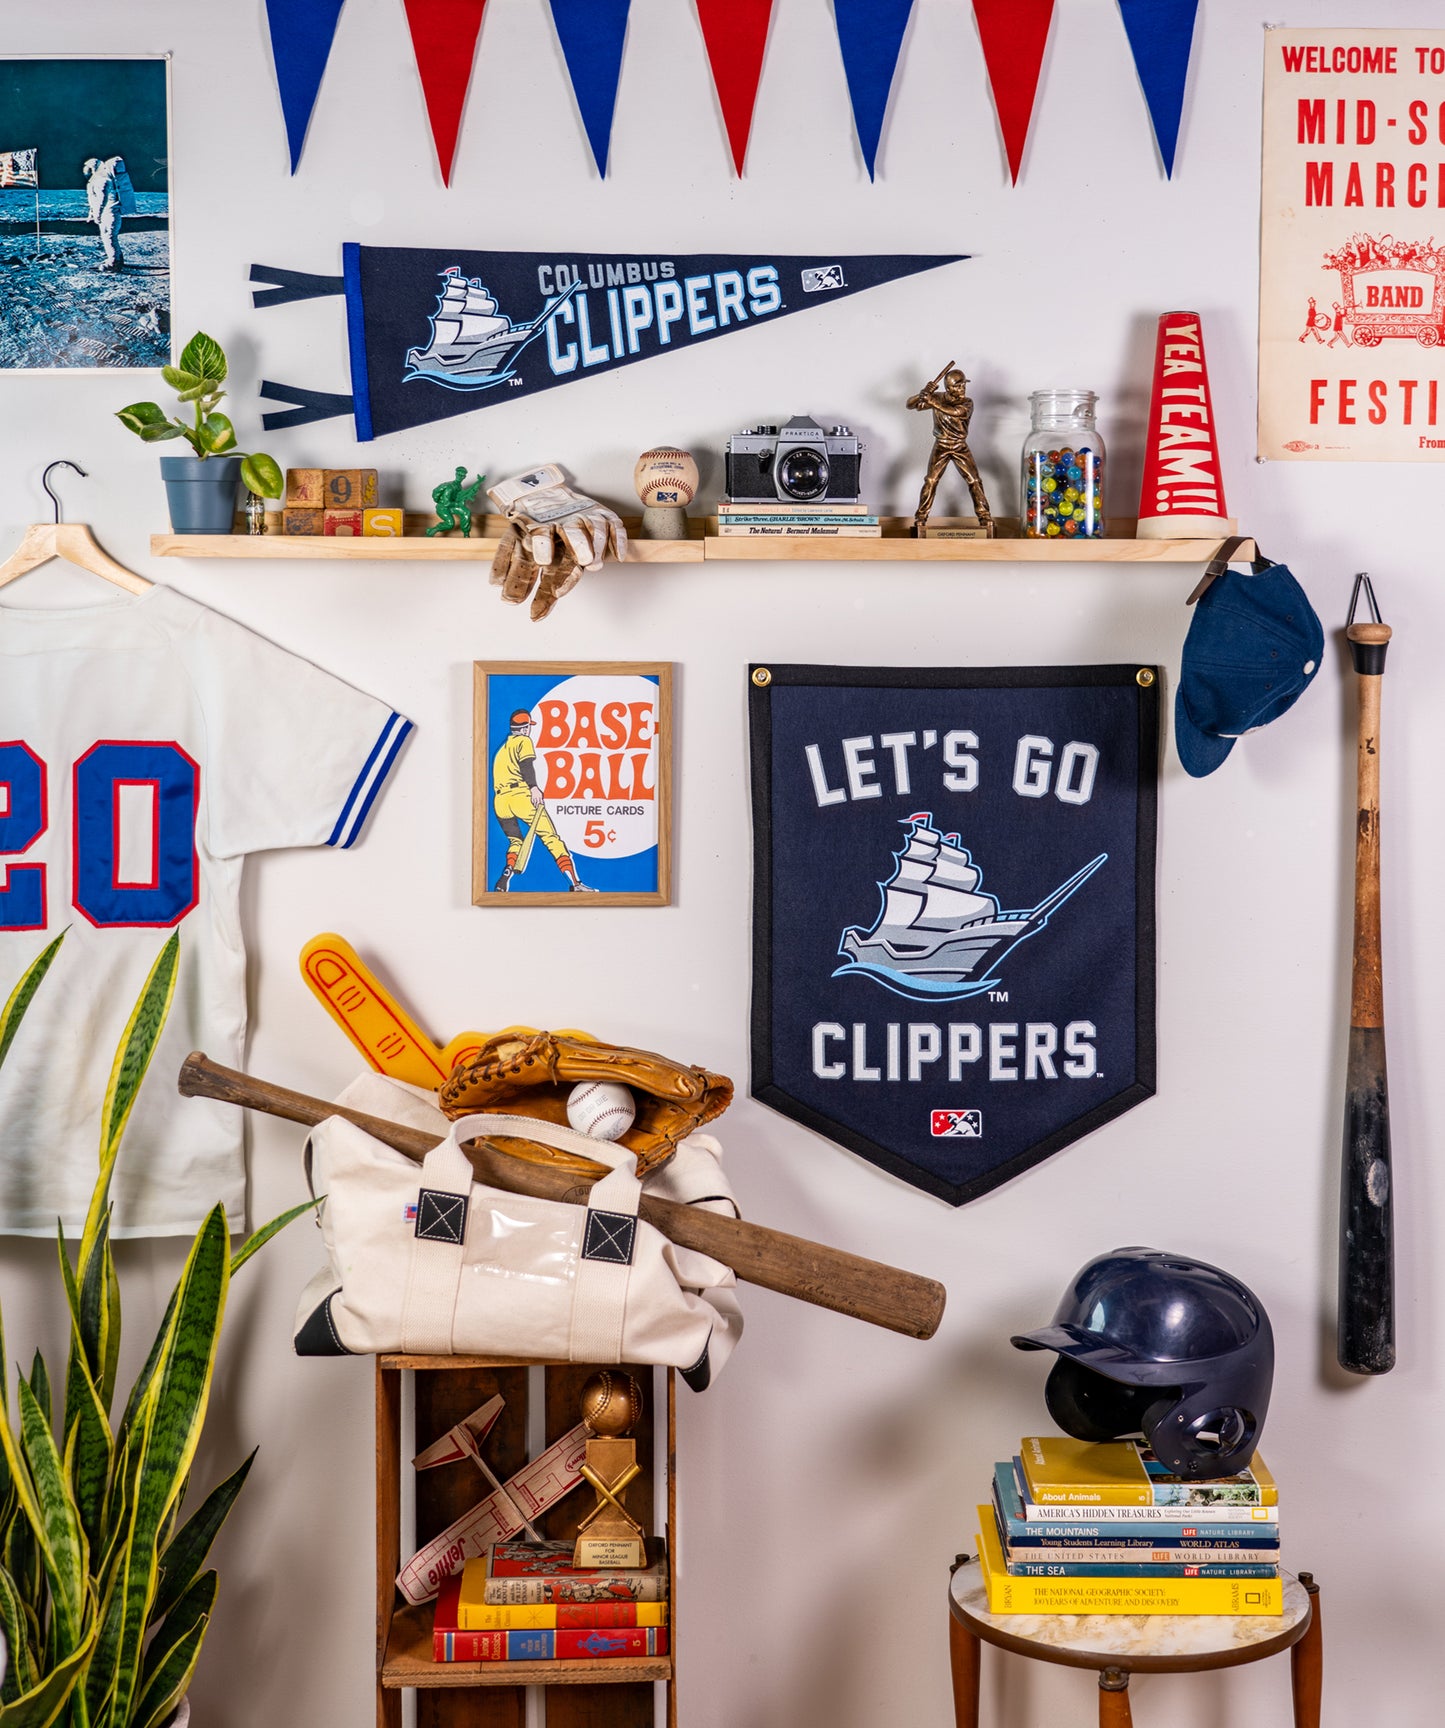 Let's Go Clippers Camp Flag • MiLB x Oxford Pennant